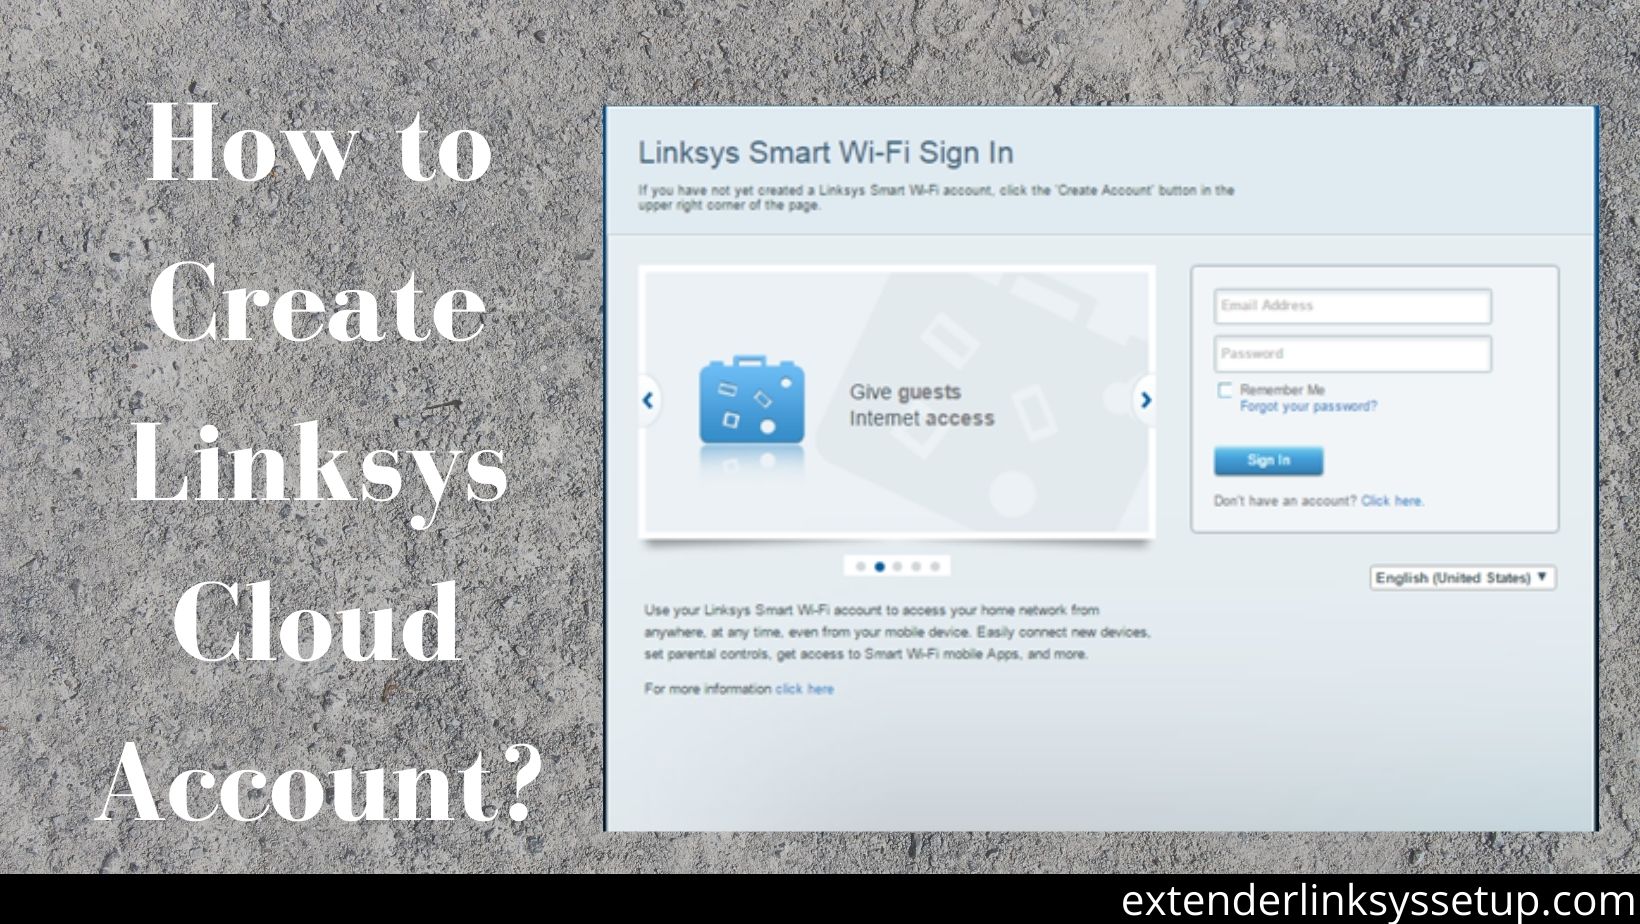 How to Create Linksys Cloud Account?